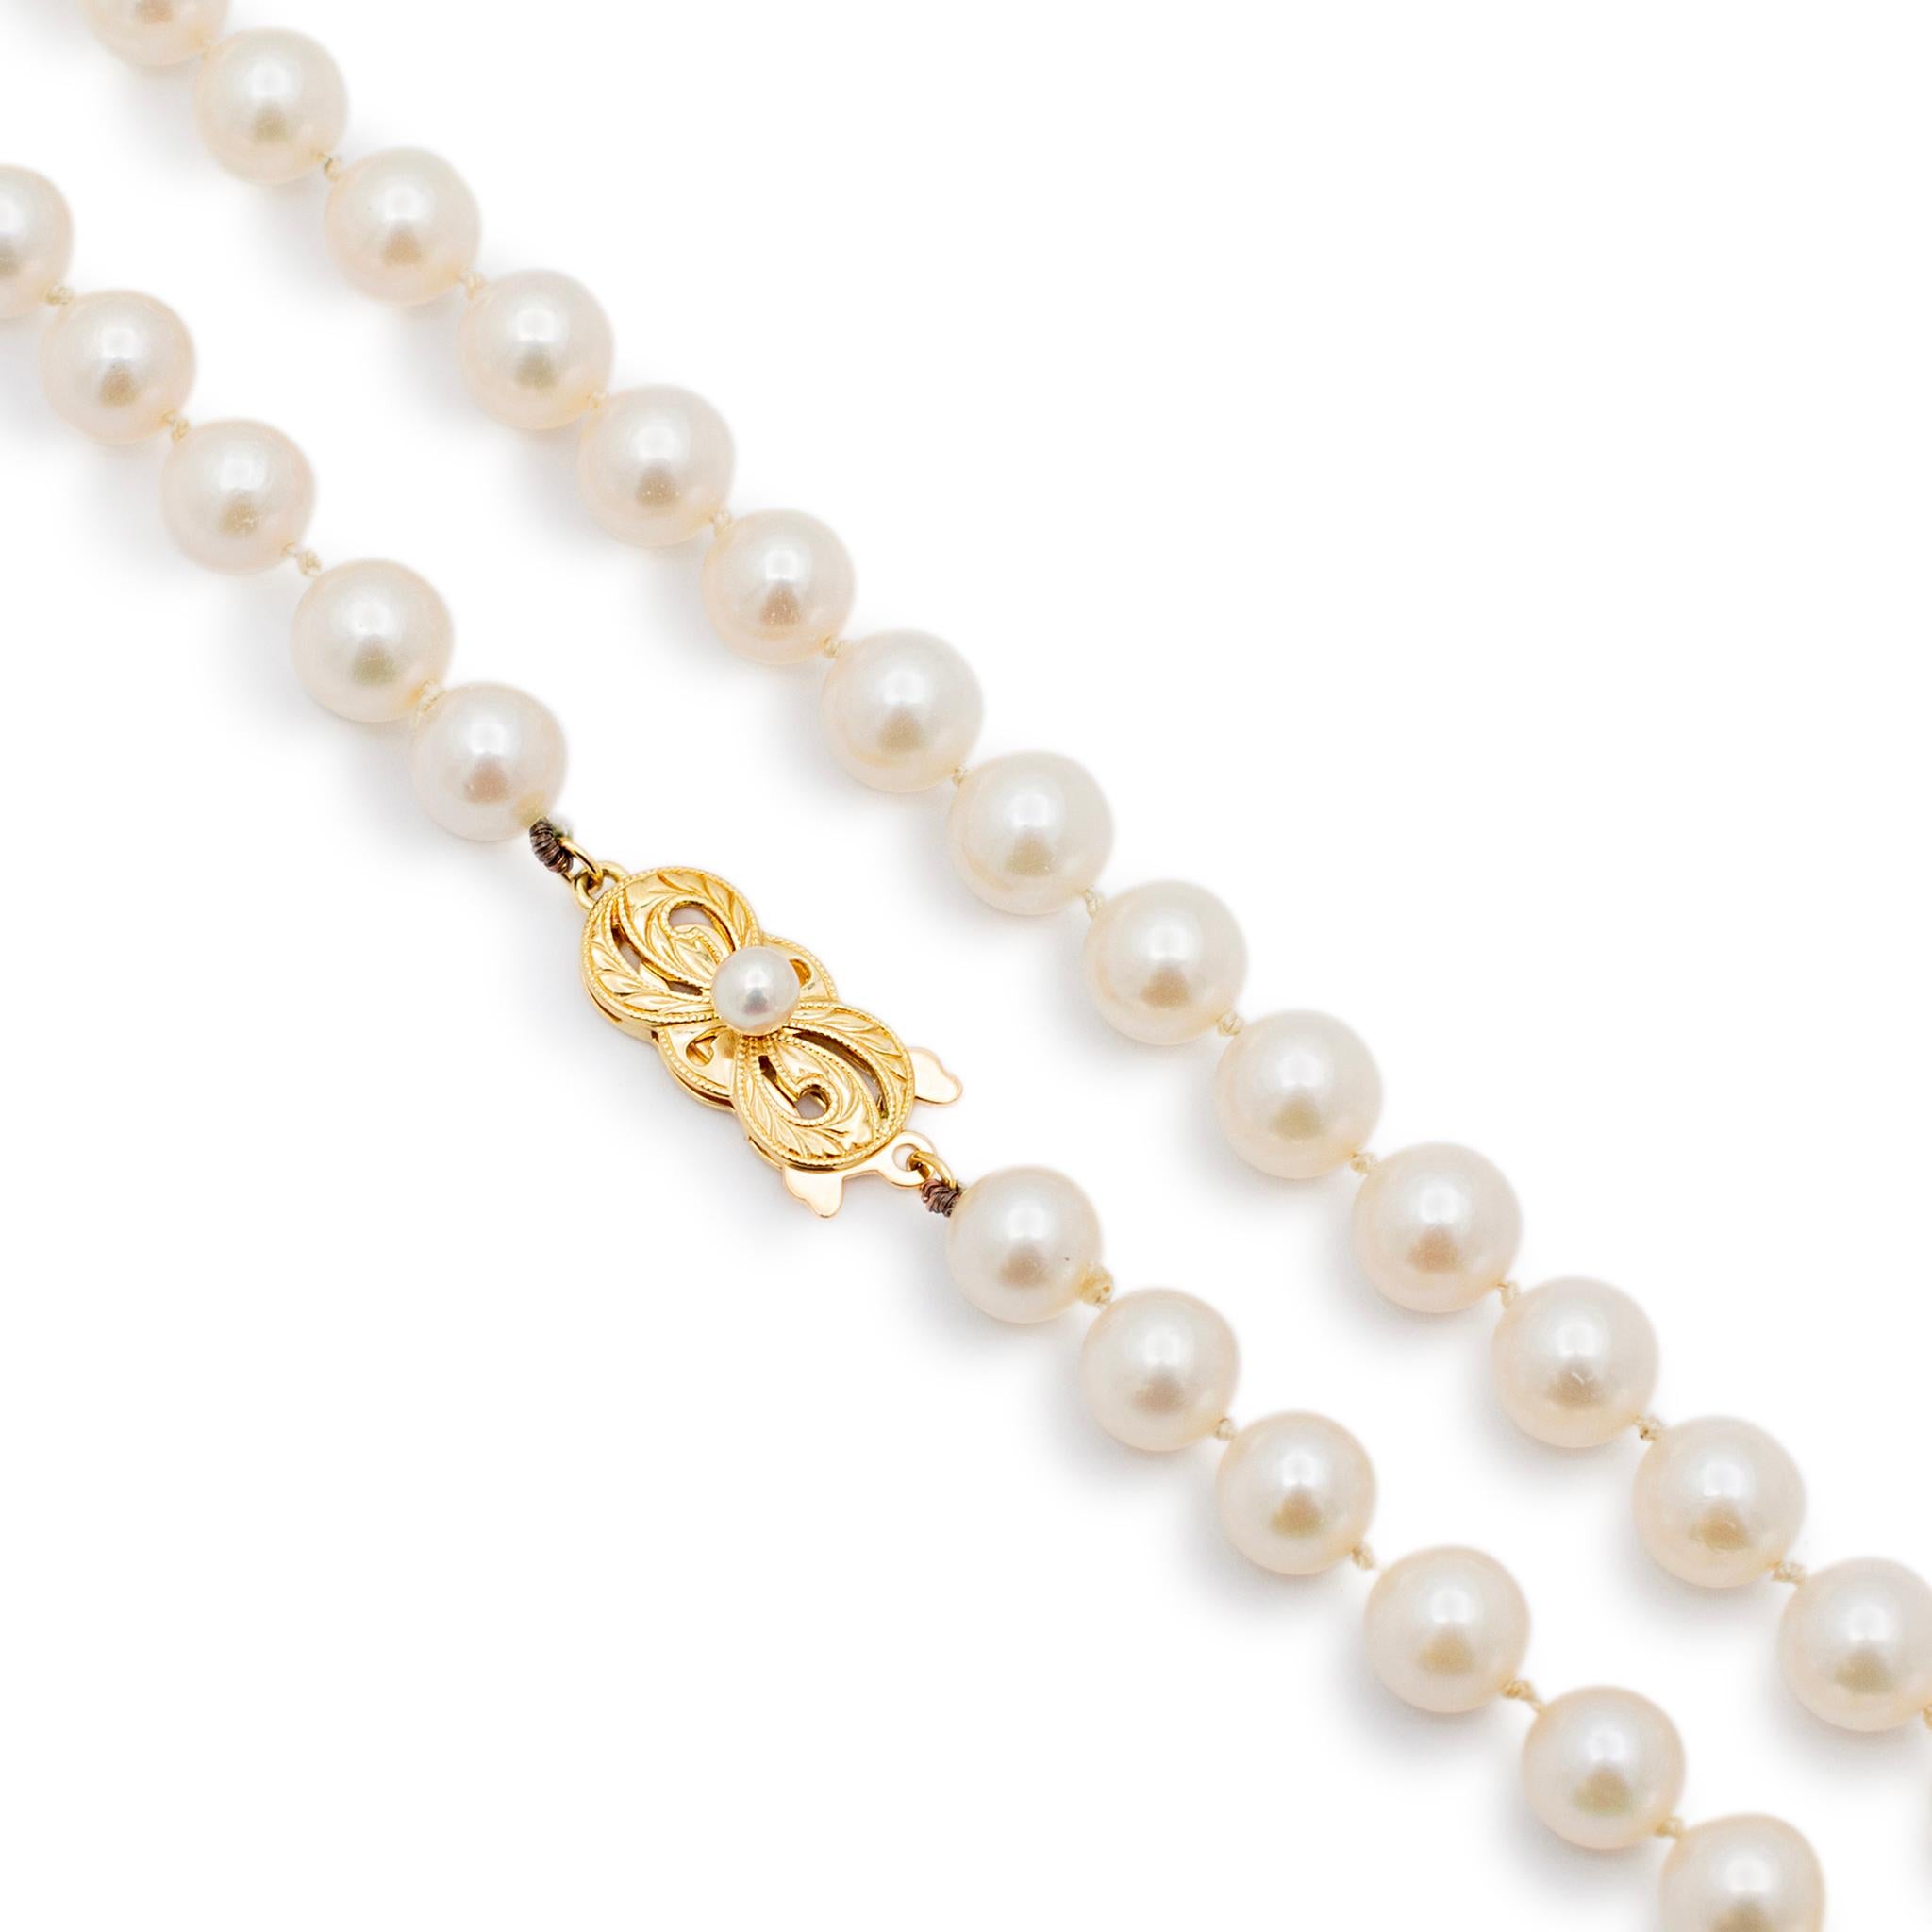 Round Cut Mikimoto Akoya Cultured Pearl Strand Bead Chain Necklace - 18K Yellow Gold Clasp For Sale